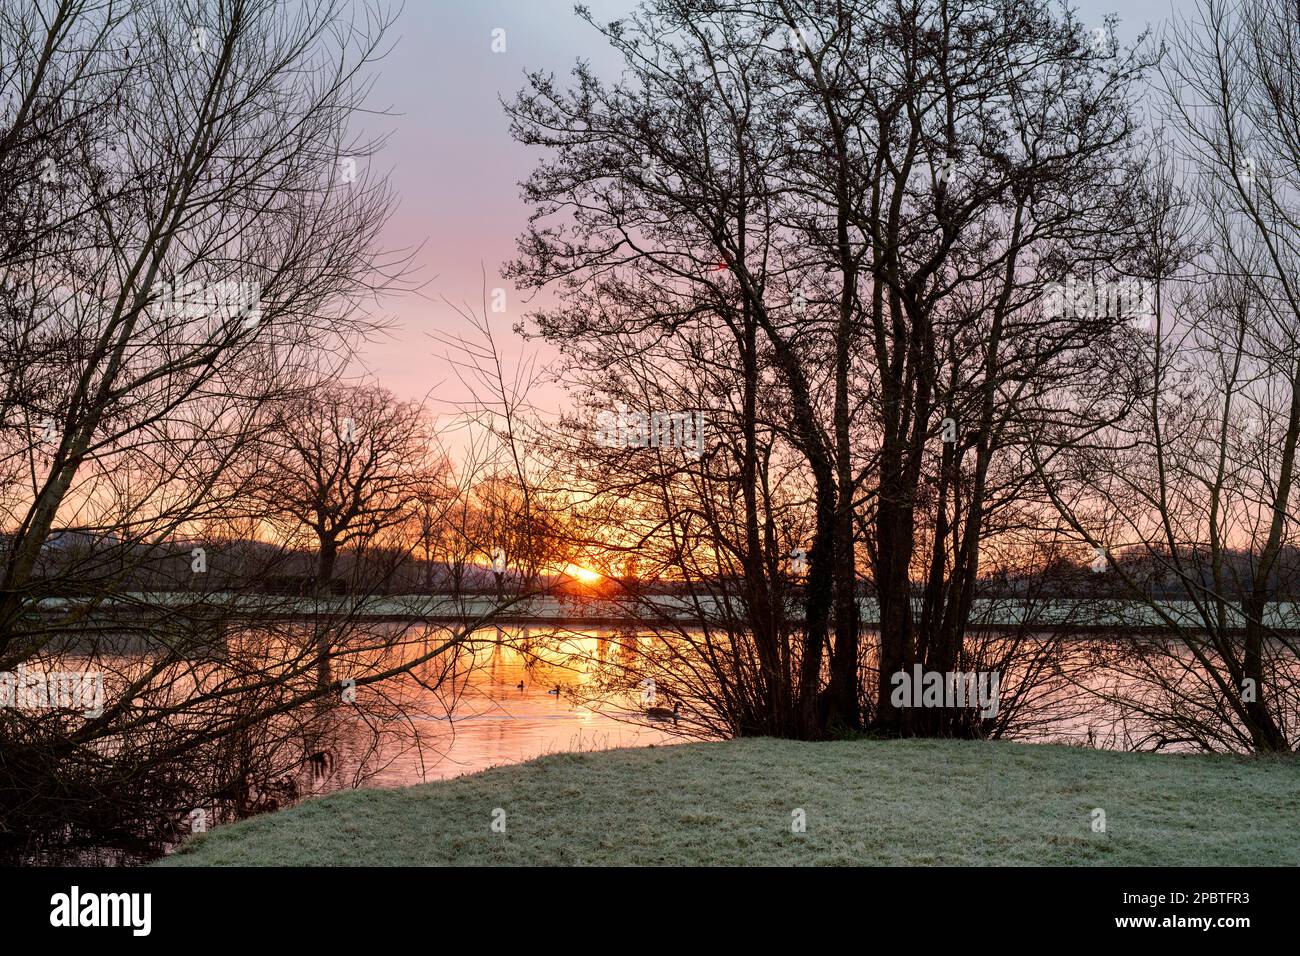 Sunrise along the River Thames. Henley on Thames, Oxfordshire, England Stock Photo